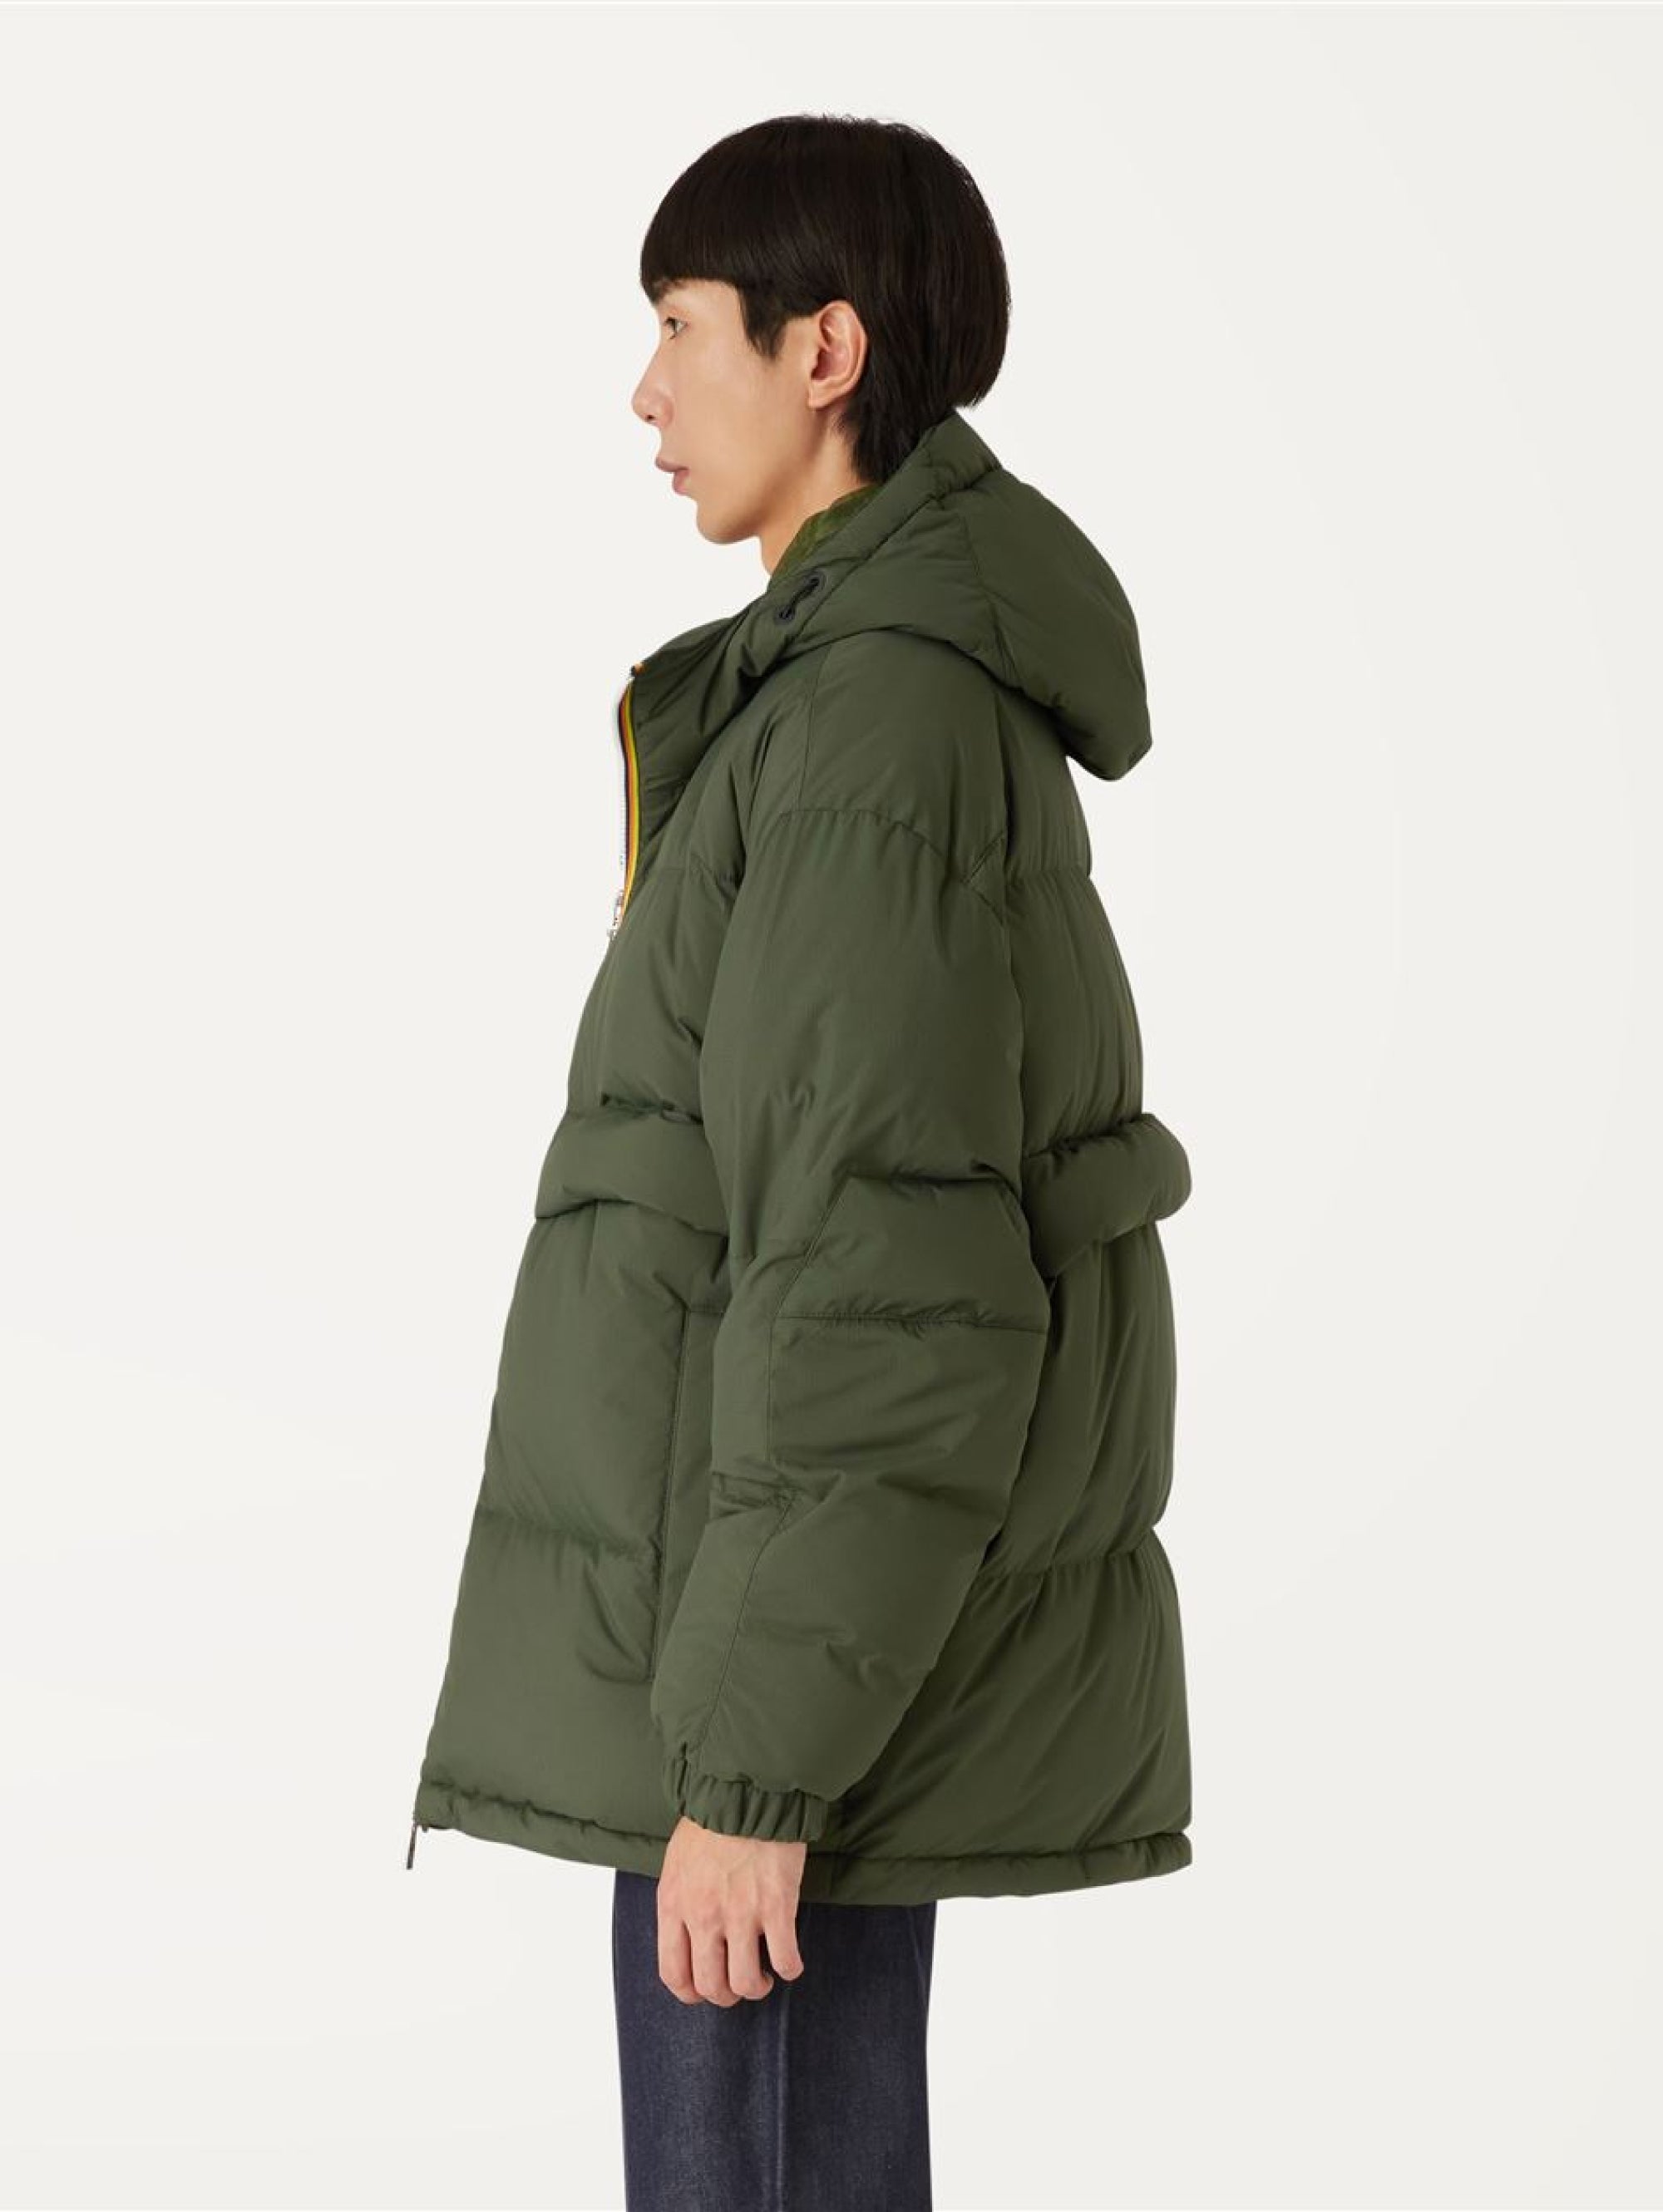 Recycled Nylon Jacket with Green Hood